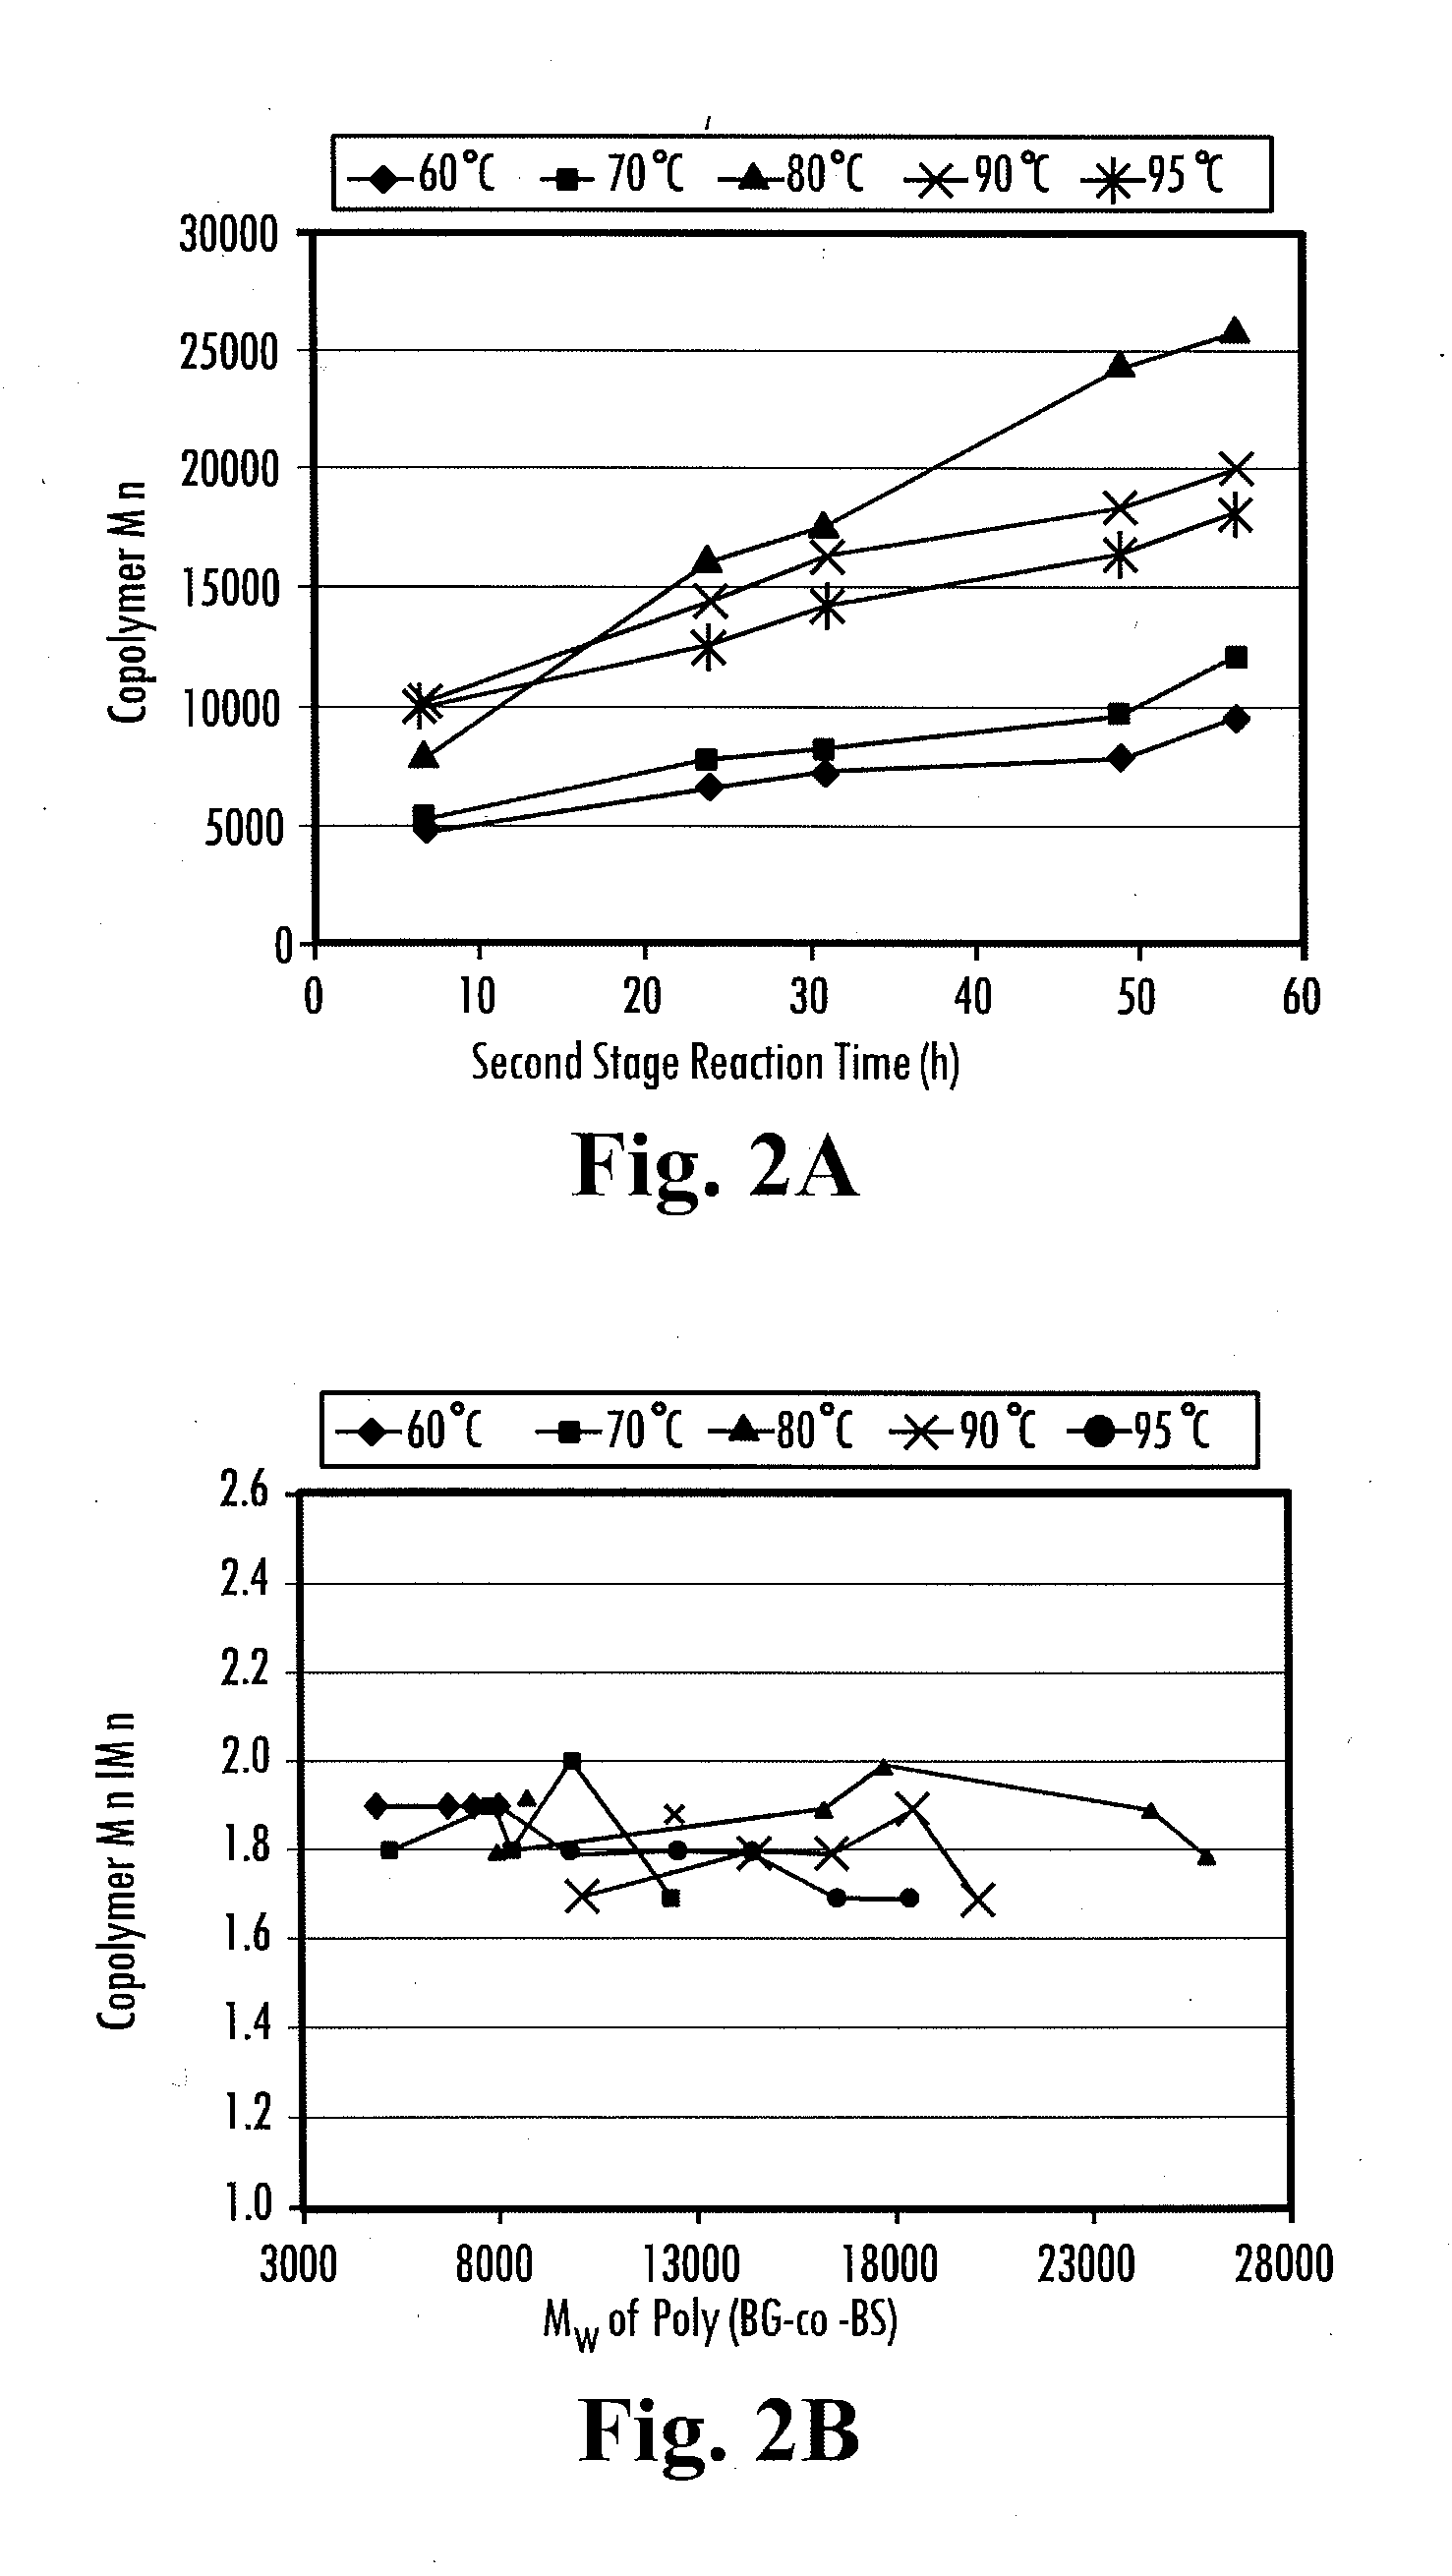 Enzyme-catalyzed polycarbonate and polycarbonate ester synthesis